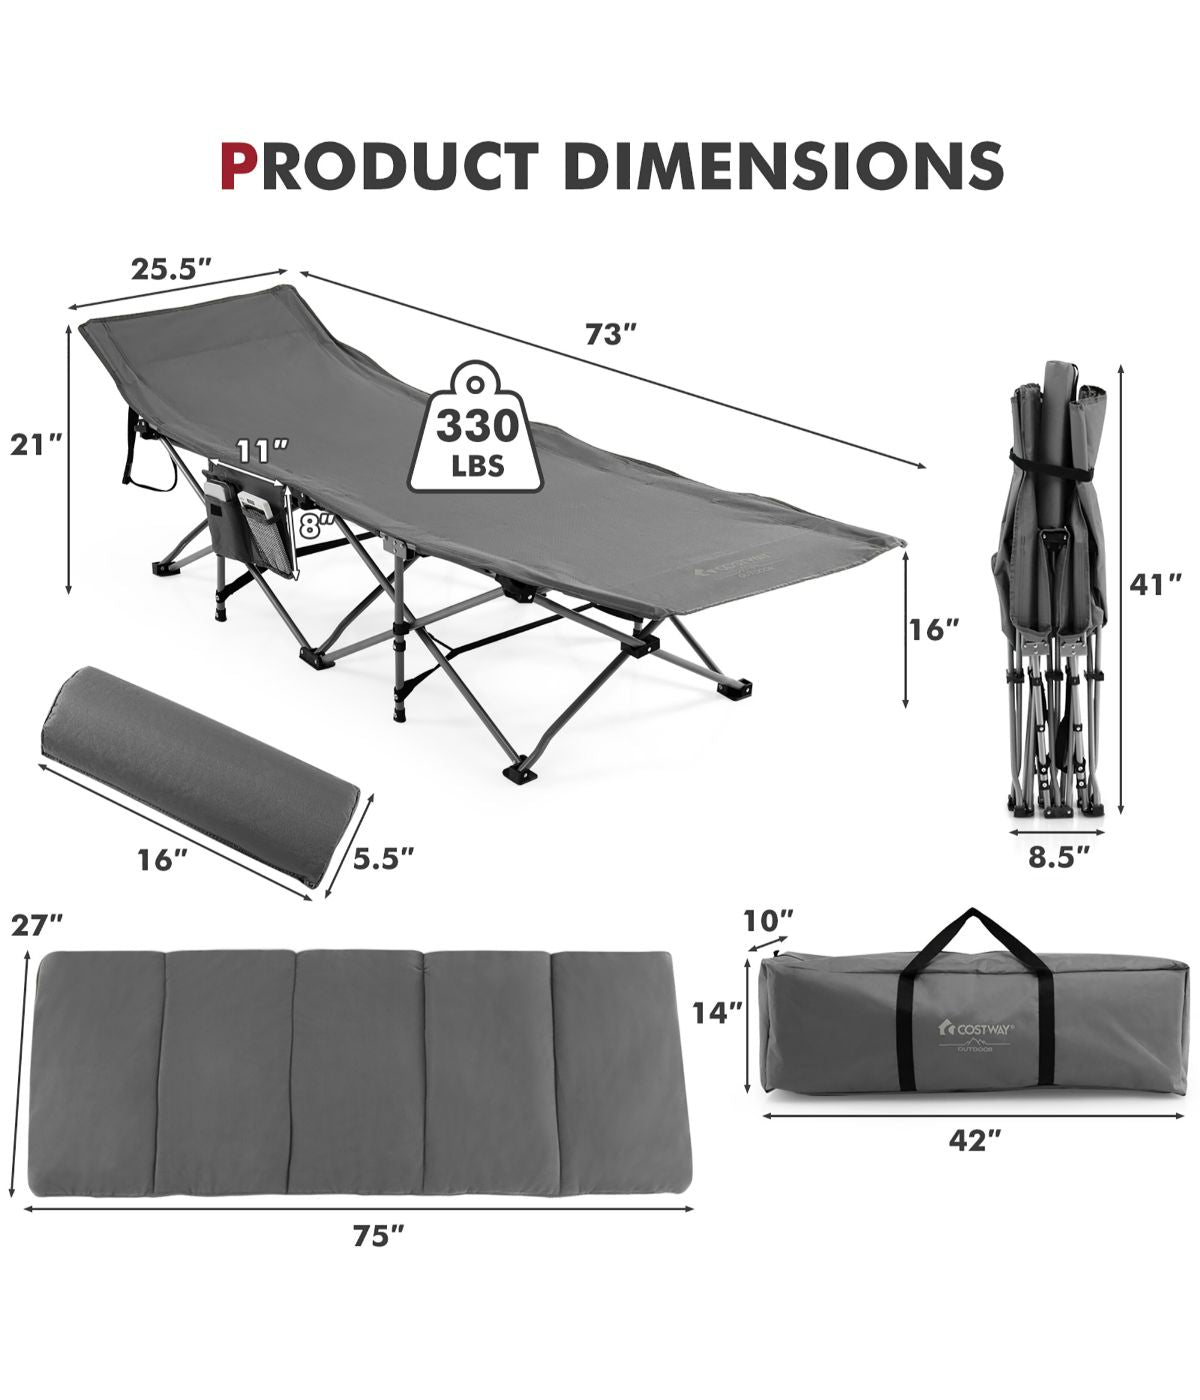 Folding Retractable Travel Camping Cot With Removable Mattress & Carry Bag Grey